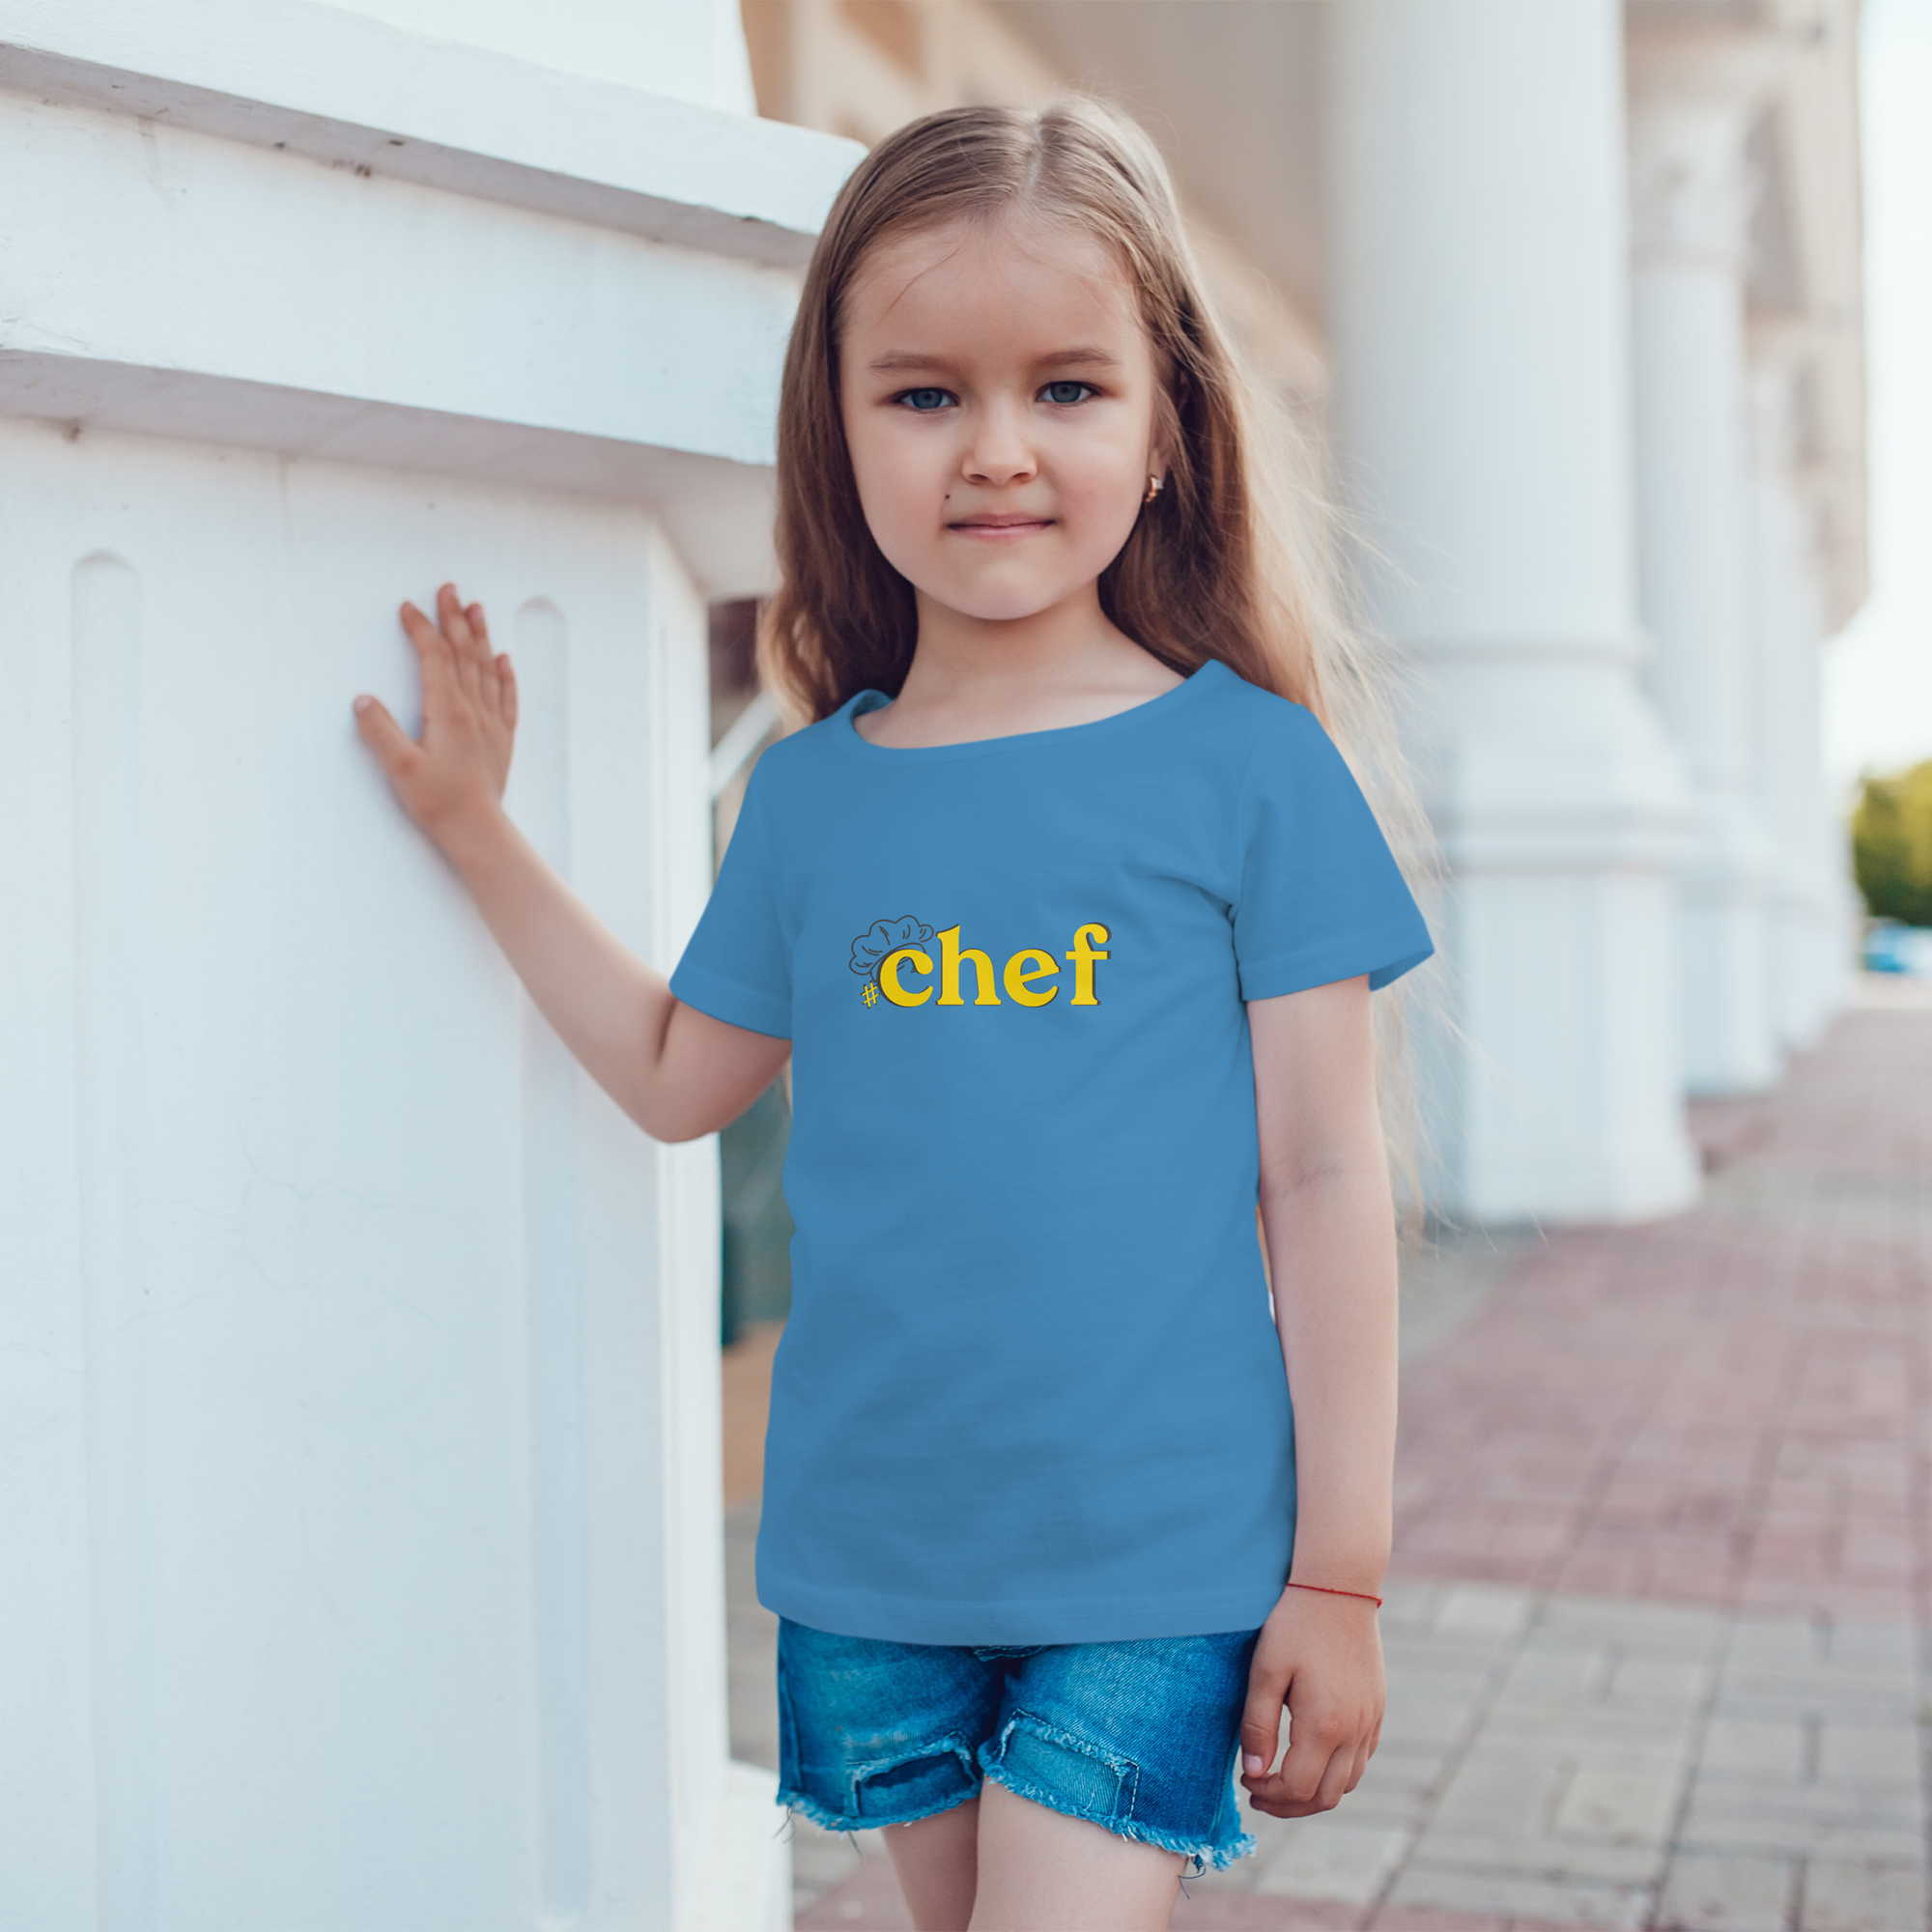 Chef-kids-Turquoise.png